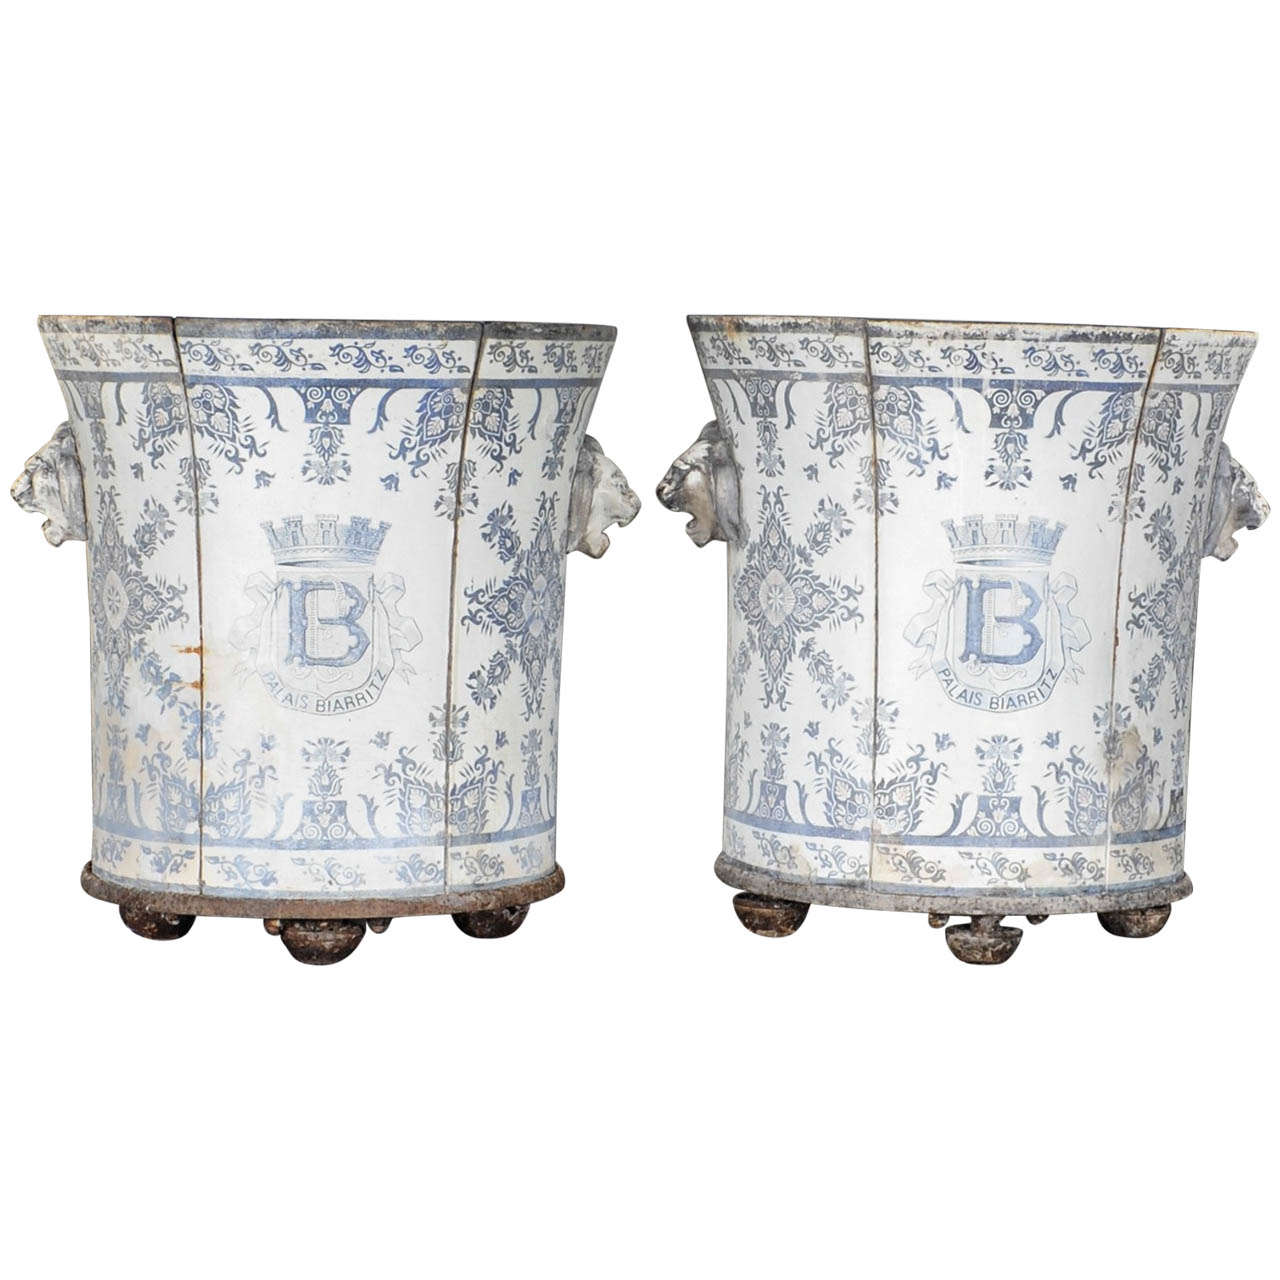 Pair of Enameled Cast-Iron Greenhouse Planters, Rouen Style